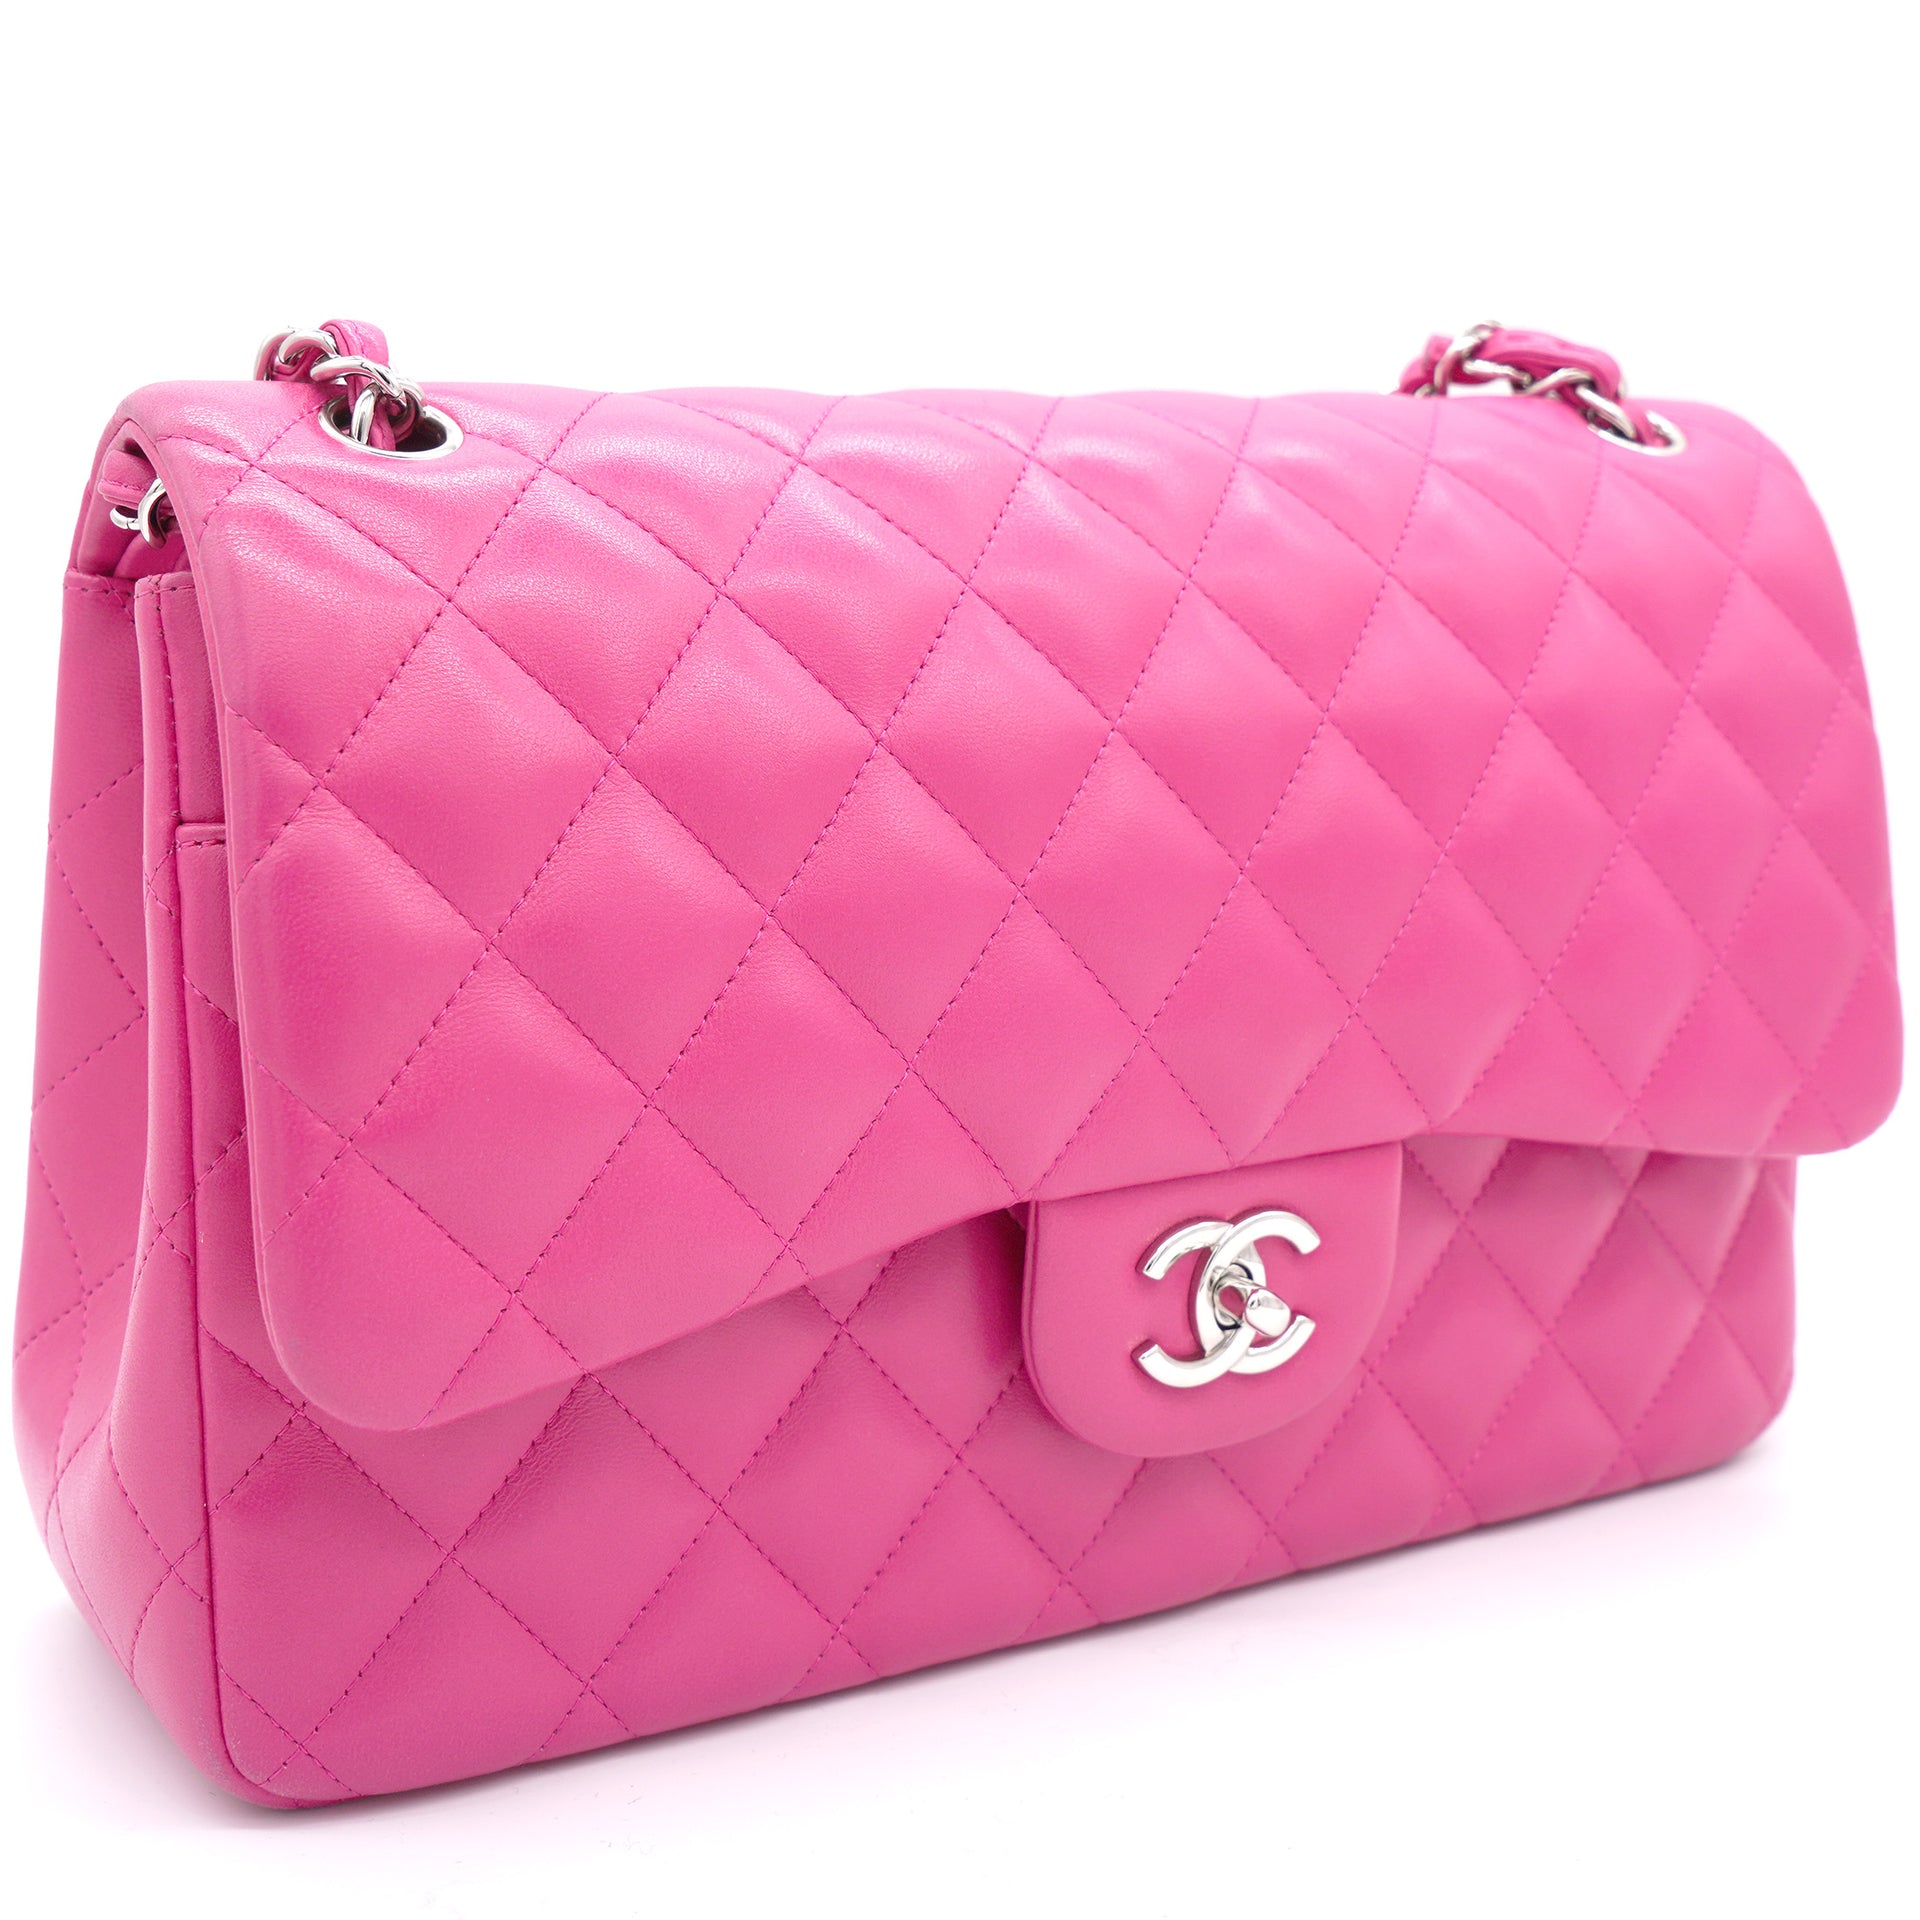  BRAND NEW Chanel 21S Medium Classic Flap Light Pink Caviar  Nonnego Luxury Bags  Wallets on Carousell